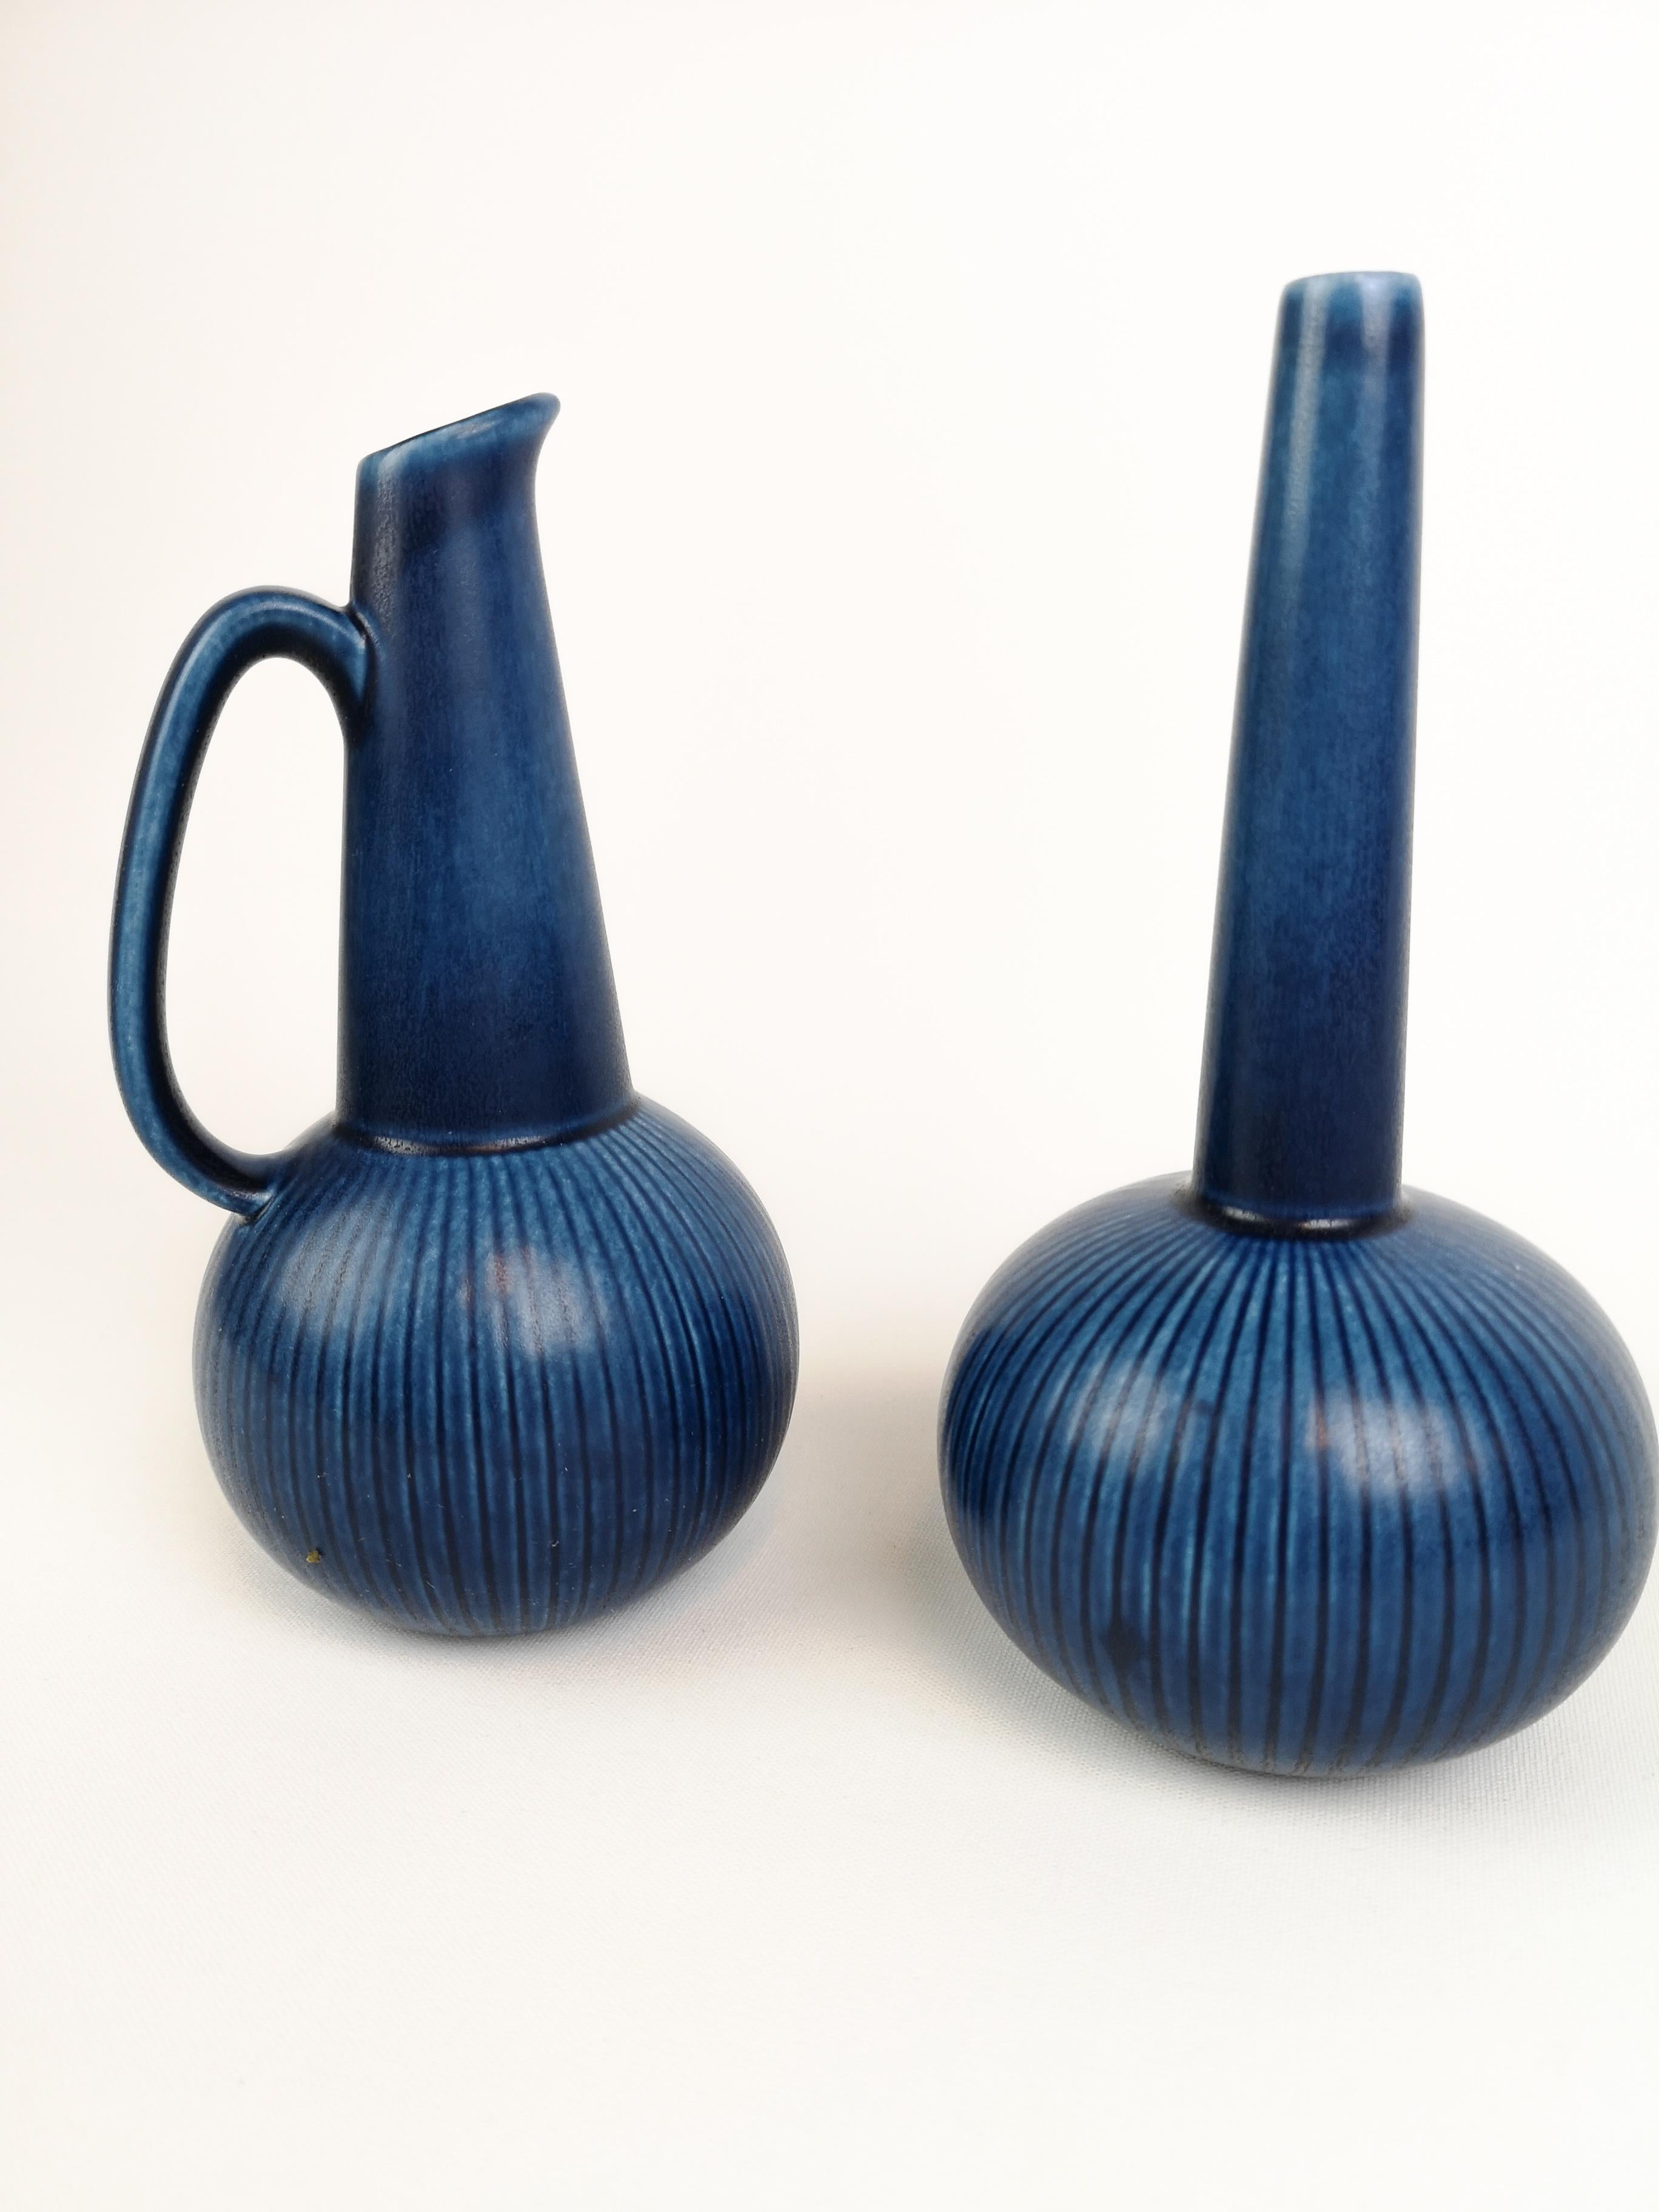 Wonderful blue glaze on these 2 vases from Rörstrand Sweden, designed by Gunnar Nylund in the 1950s.

They are both in great condition.

Measures: H 20, D 10 cm.
     